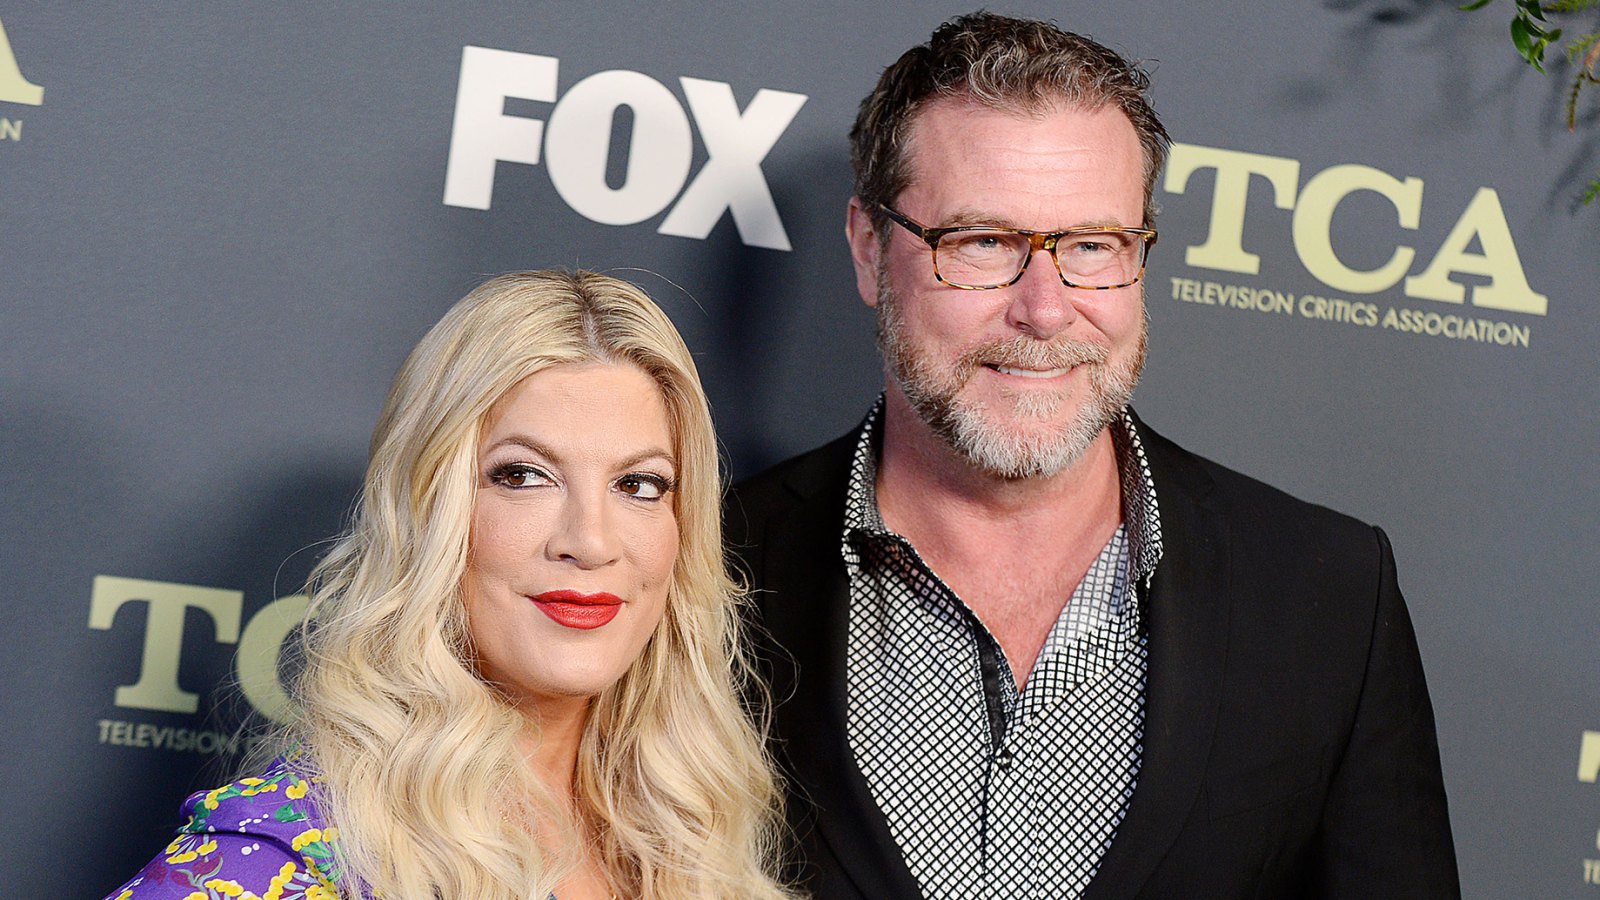 Tori Spelling Celebrates New Year's Eve Without 'Sick as Dog' Husband Dean McDermott